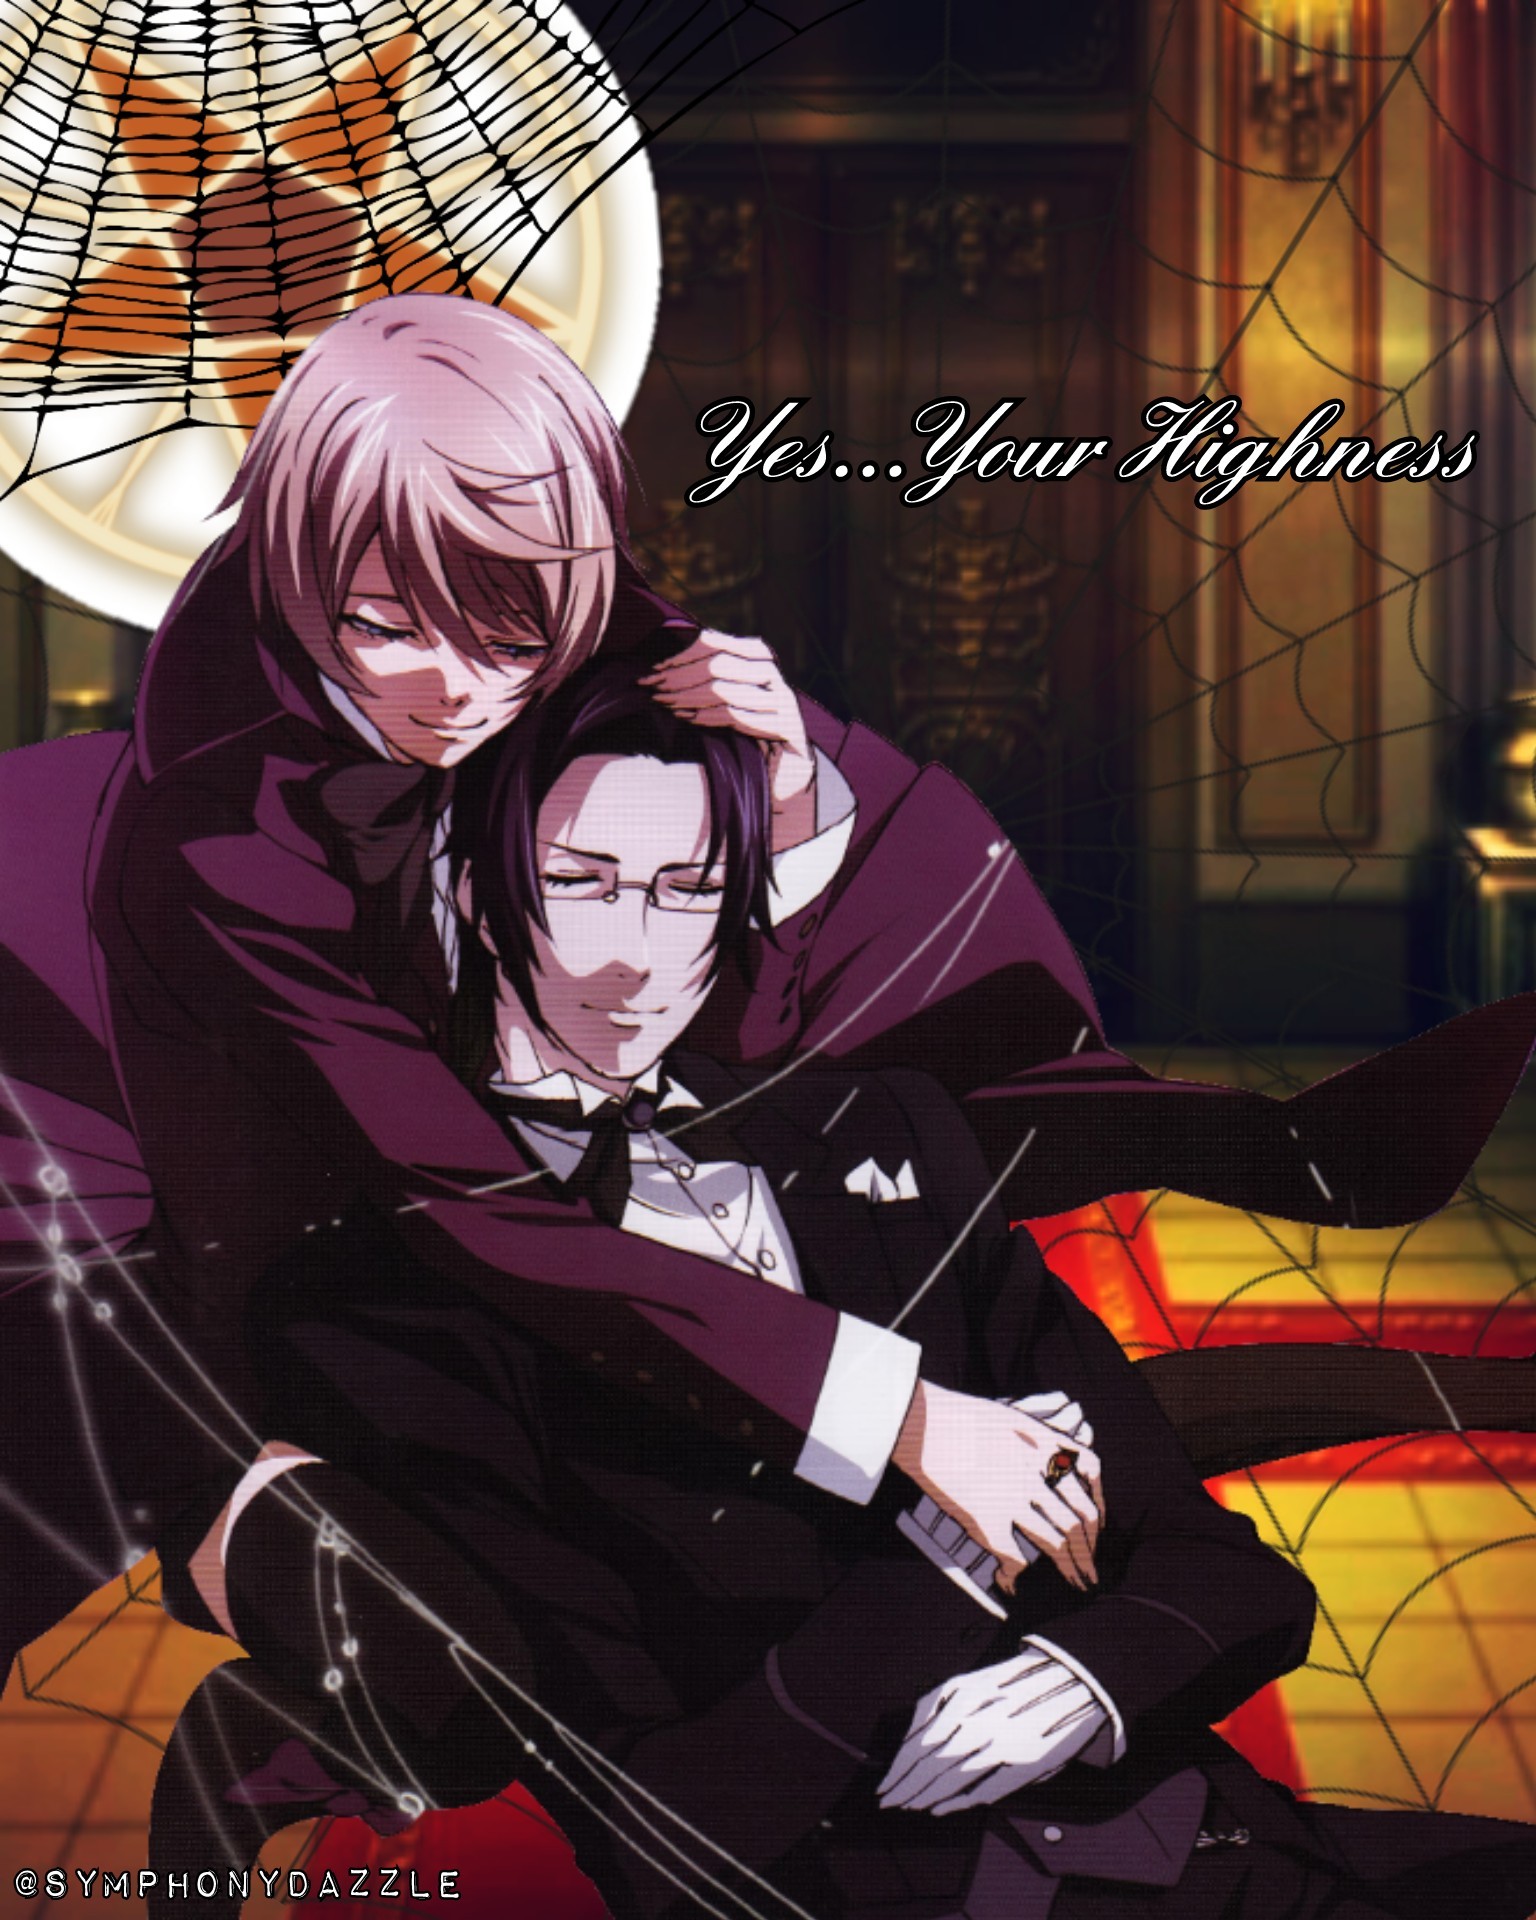 Alois and Claude TAP
So anyone gonna fill me in on what's been happening since I've been gone?